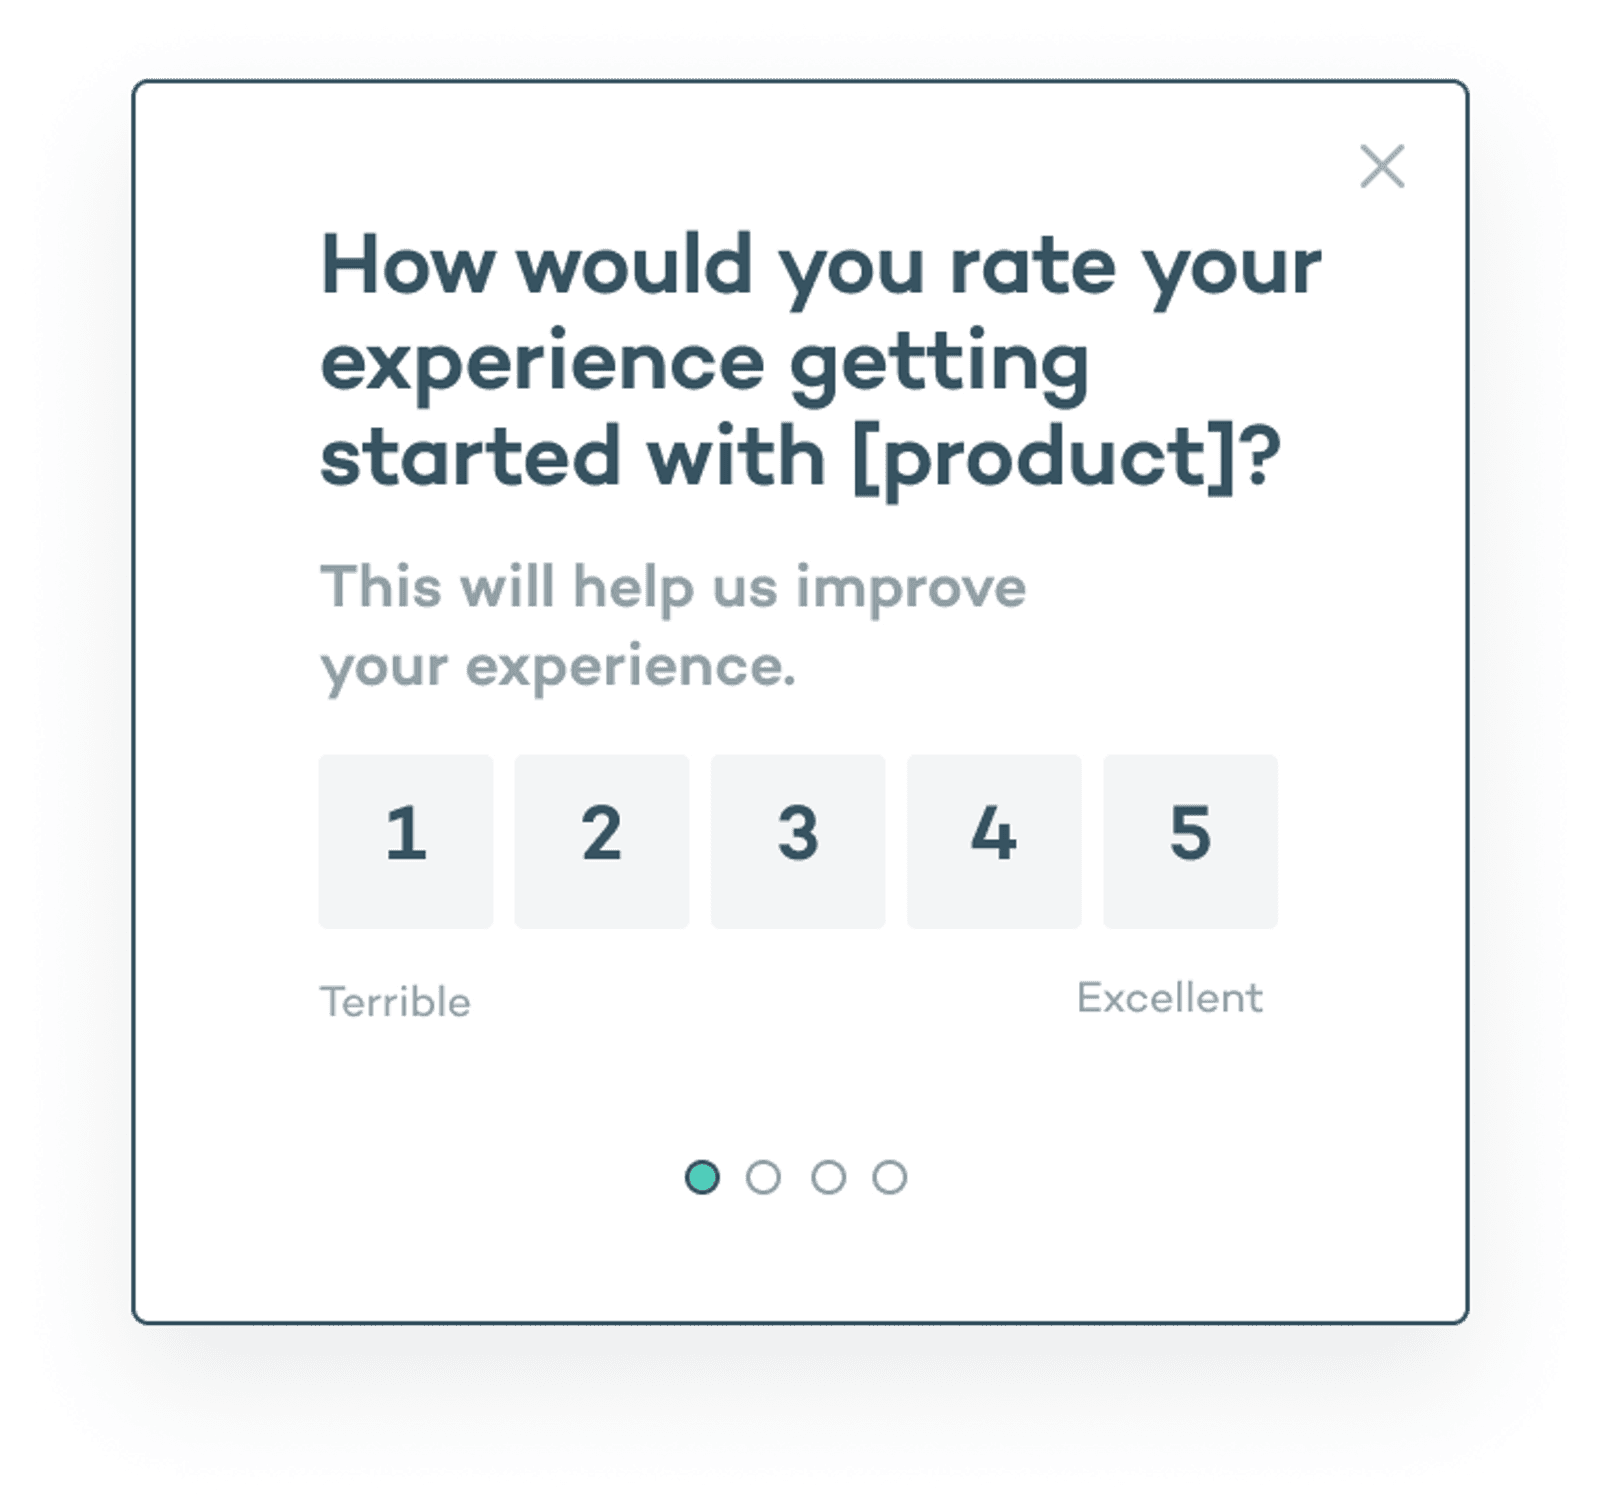 microsurvey to improve the onboarding experience